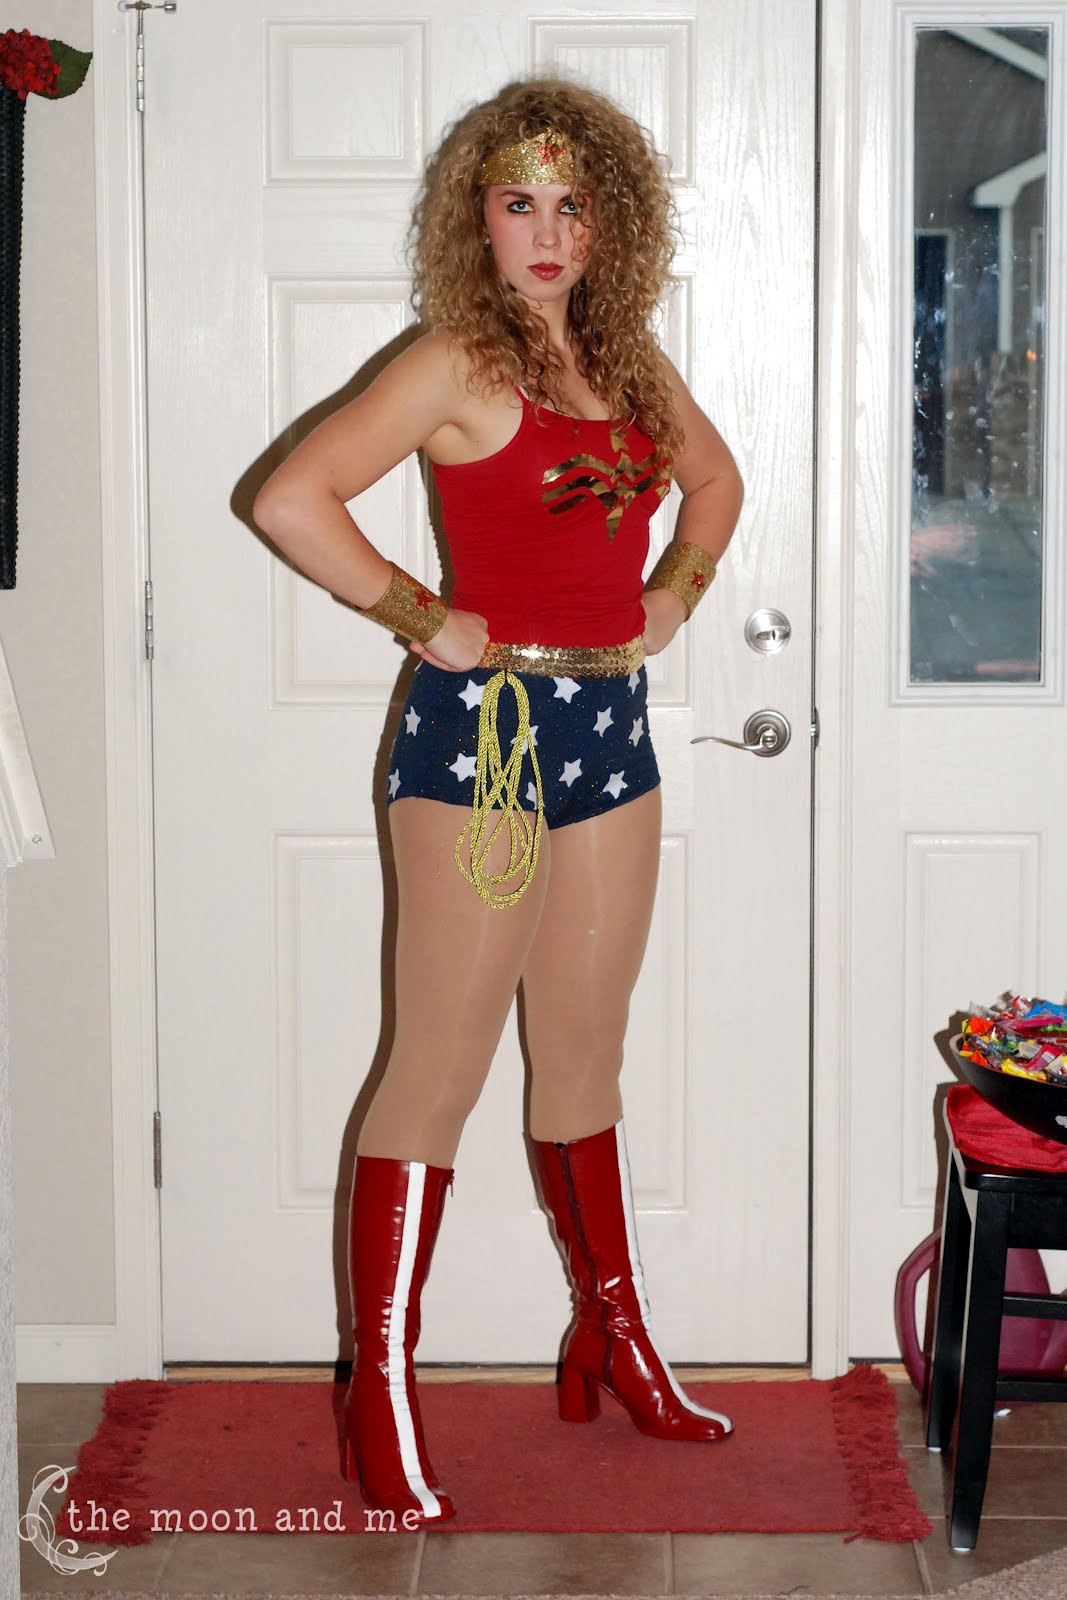 DIY Wonder Woman Costume For Kids
 The Moon and Me DIY Wonder Woman Costume